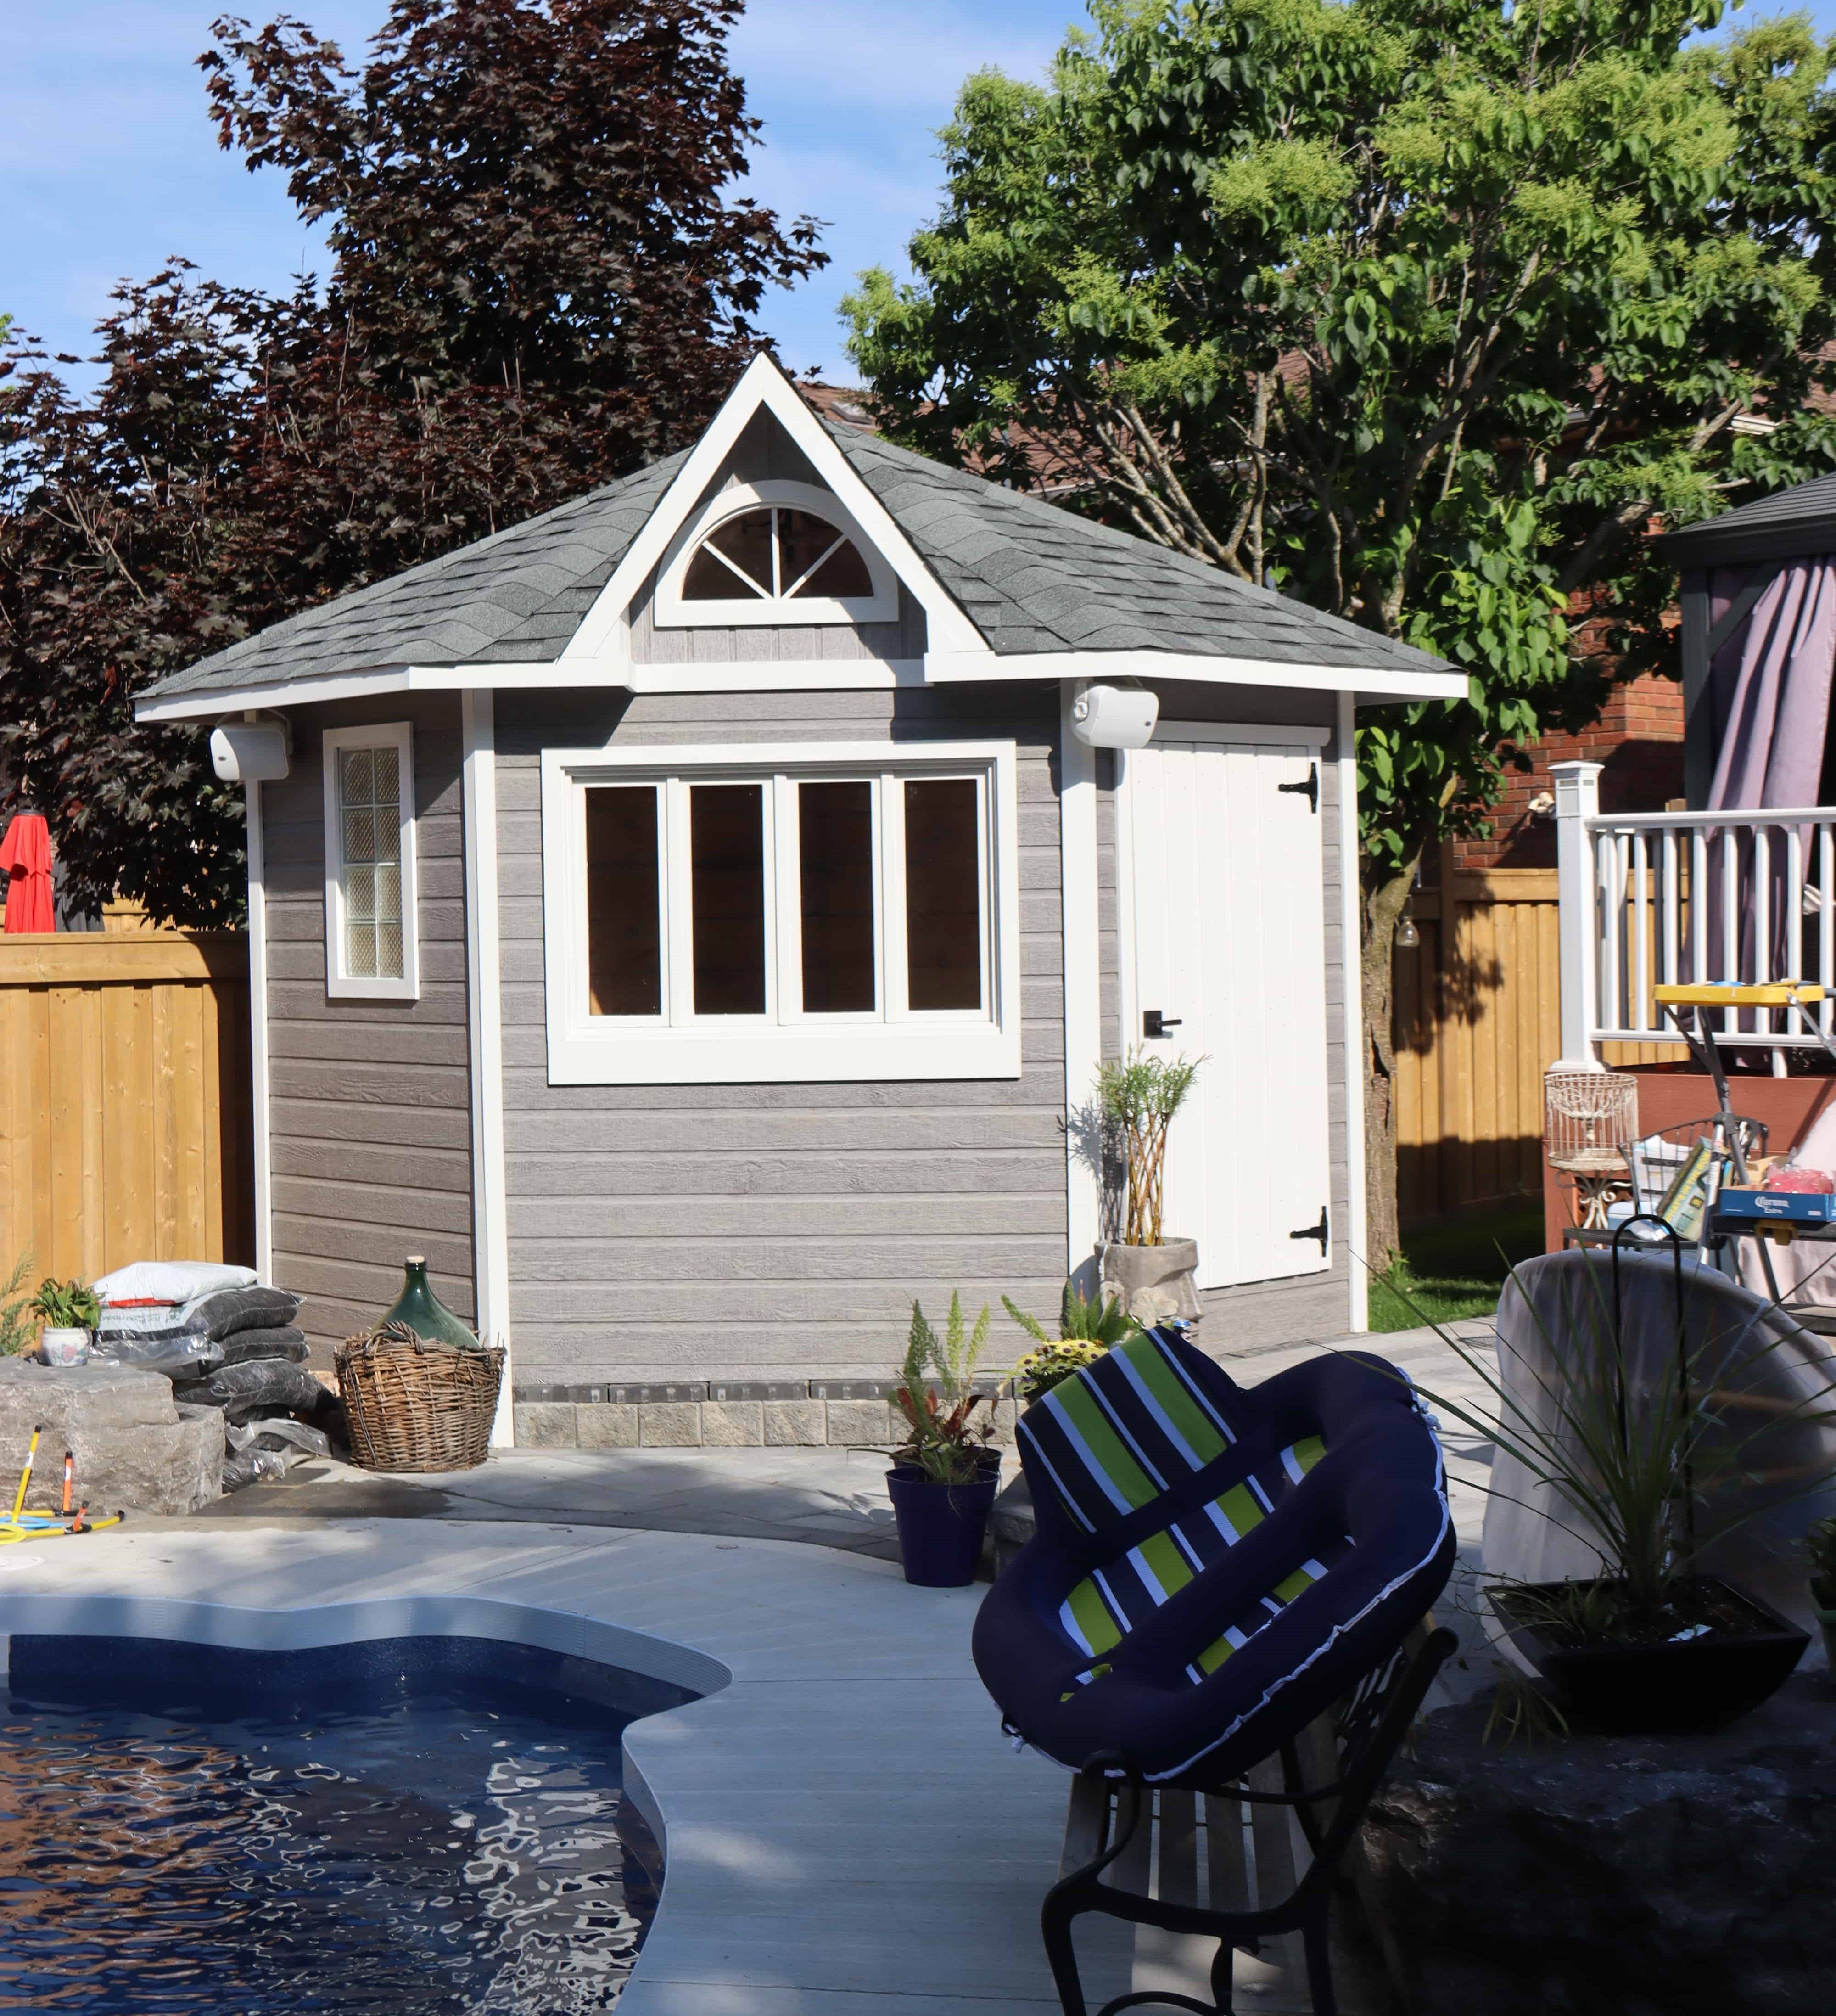 Front view of 9' Catalina Pool Cabana located in Whitby, Ontario – Summerwood Products